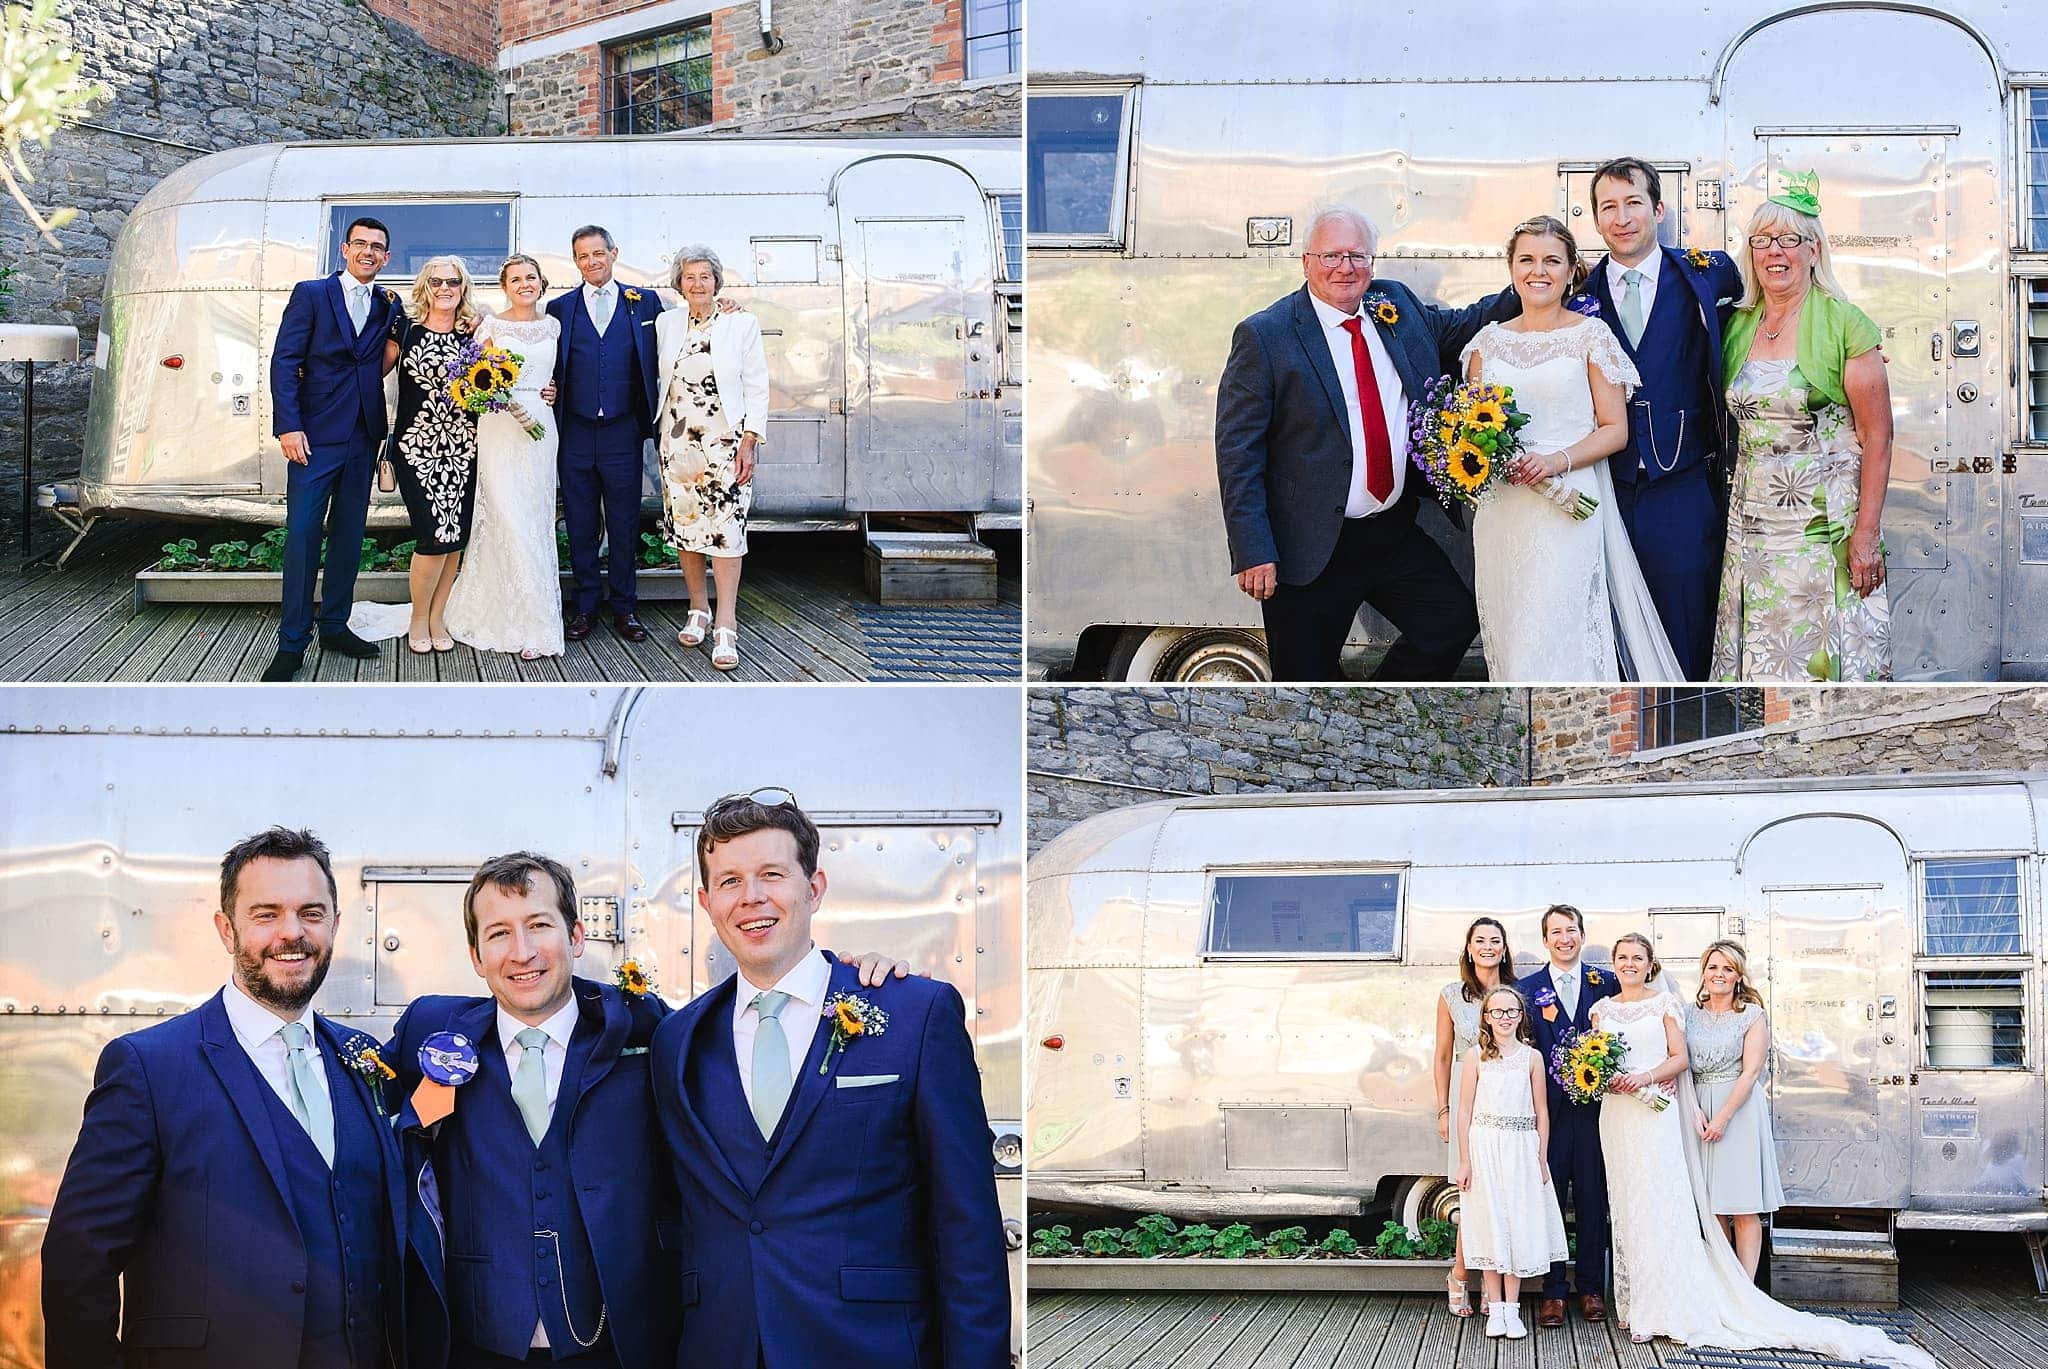 Family photo's in front of the airstream at the Paintwork's courtyard